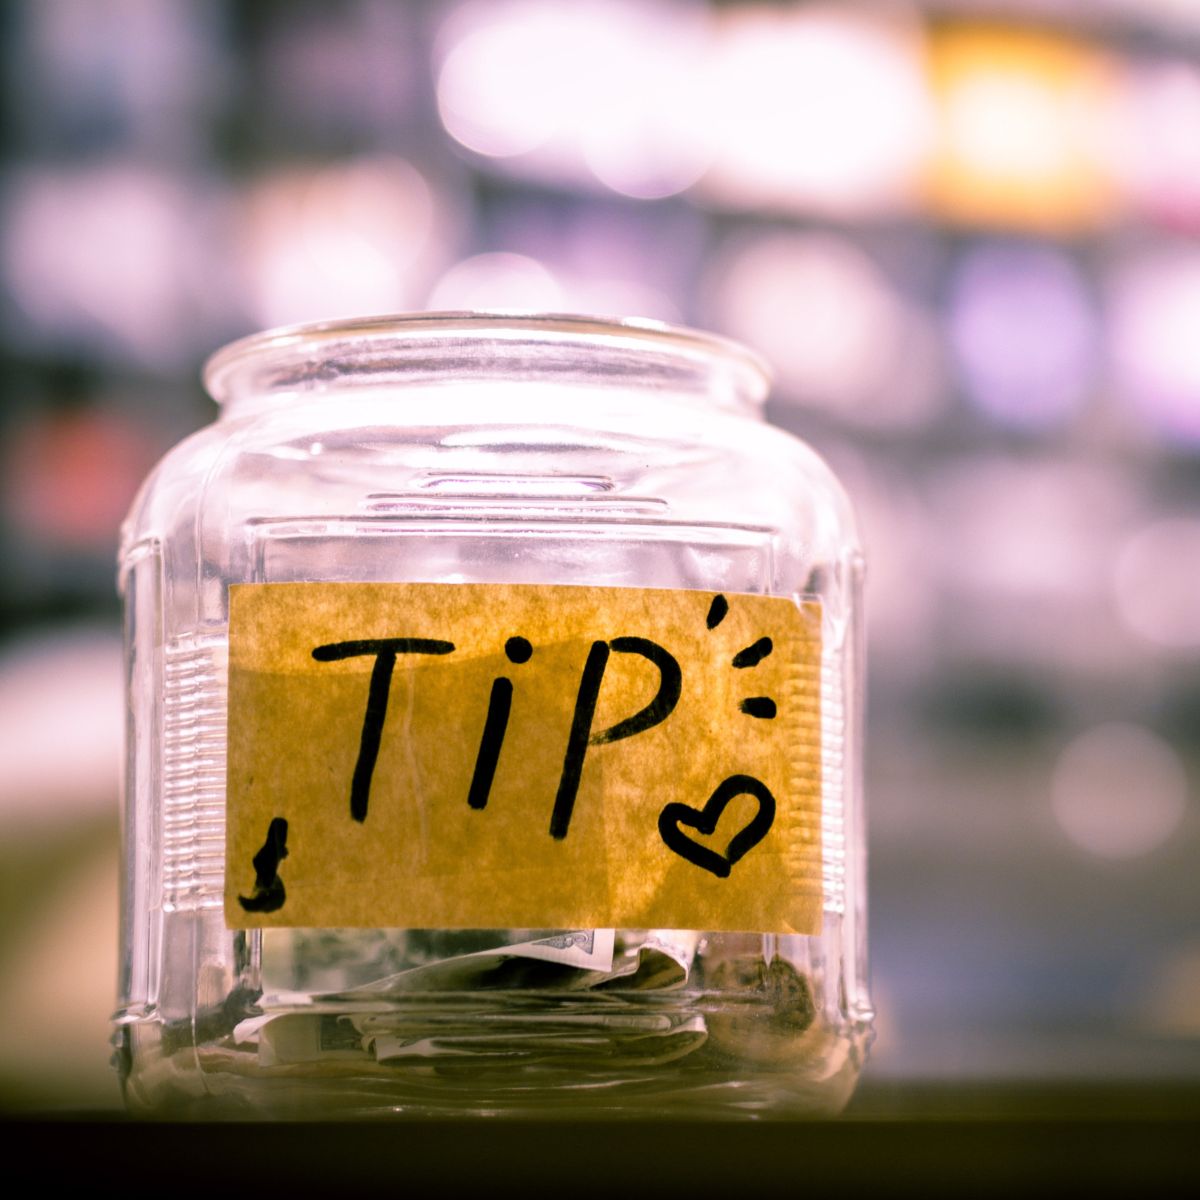 A tip jar has some money insie and a label with a heart.